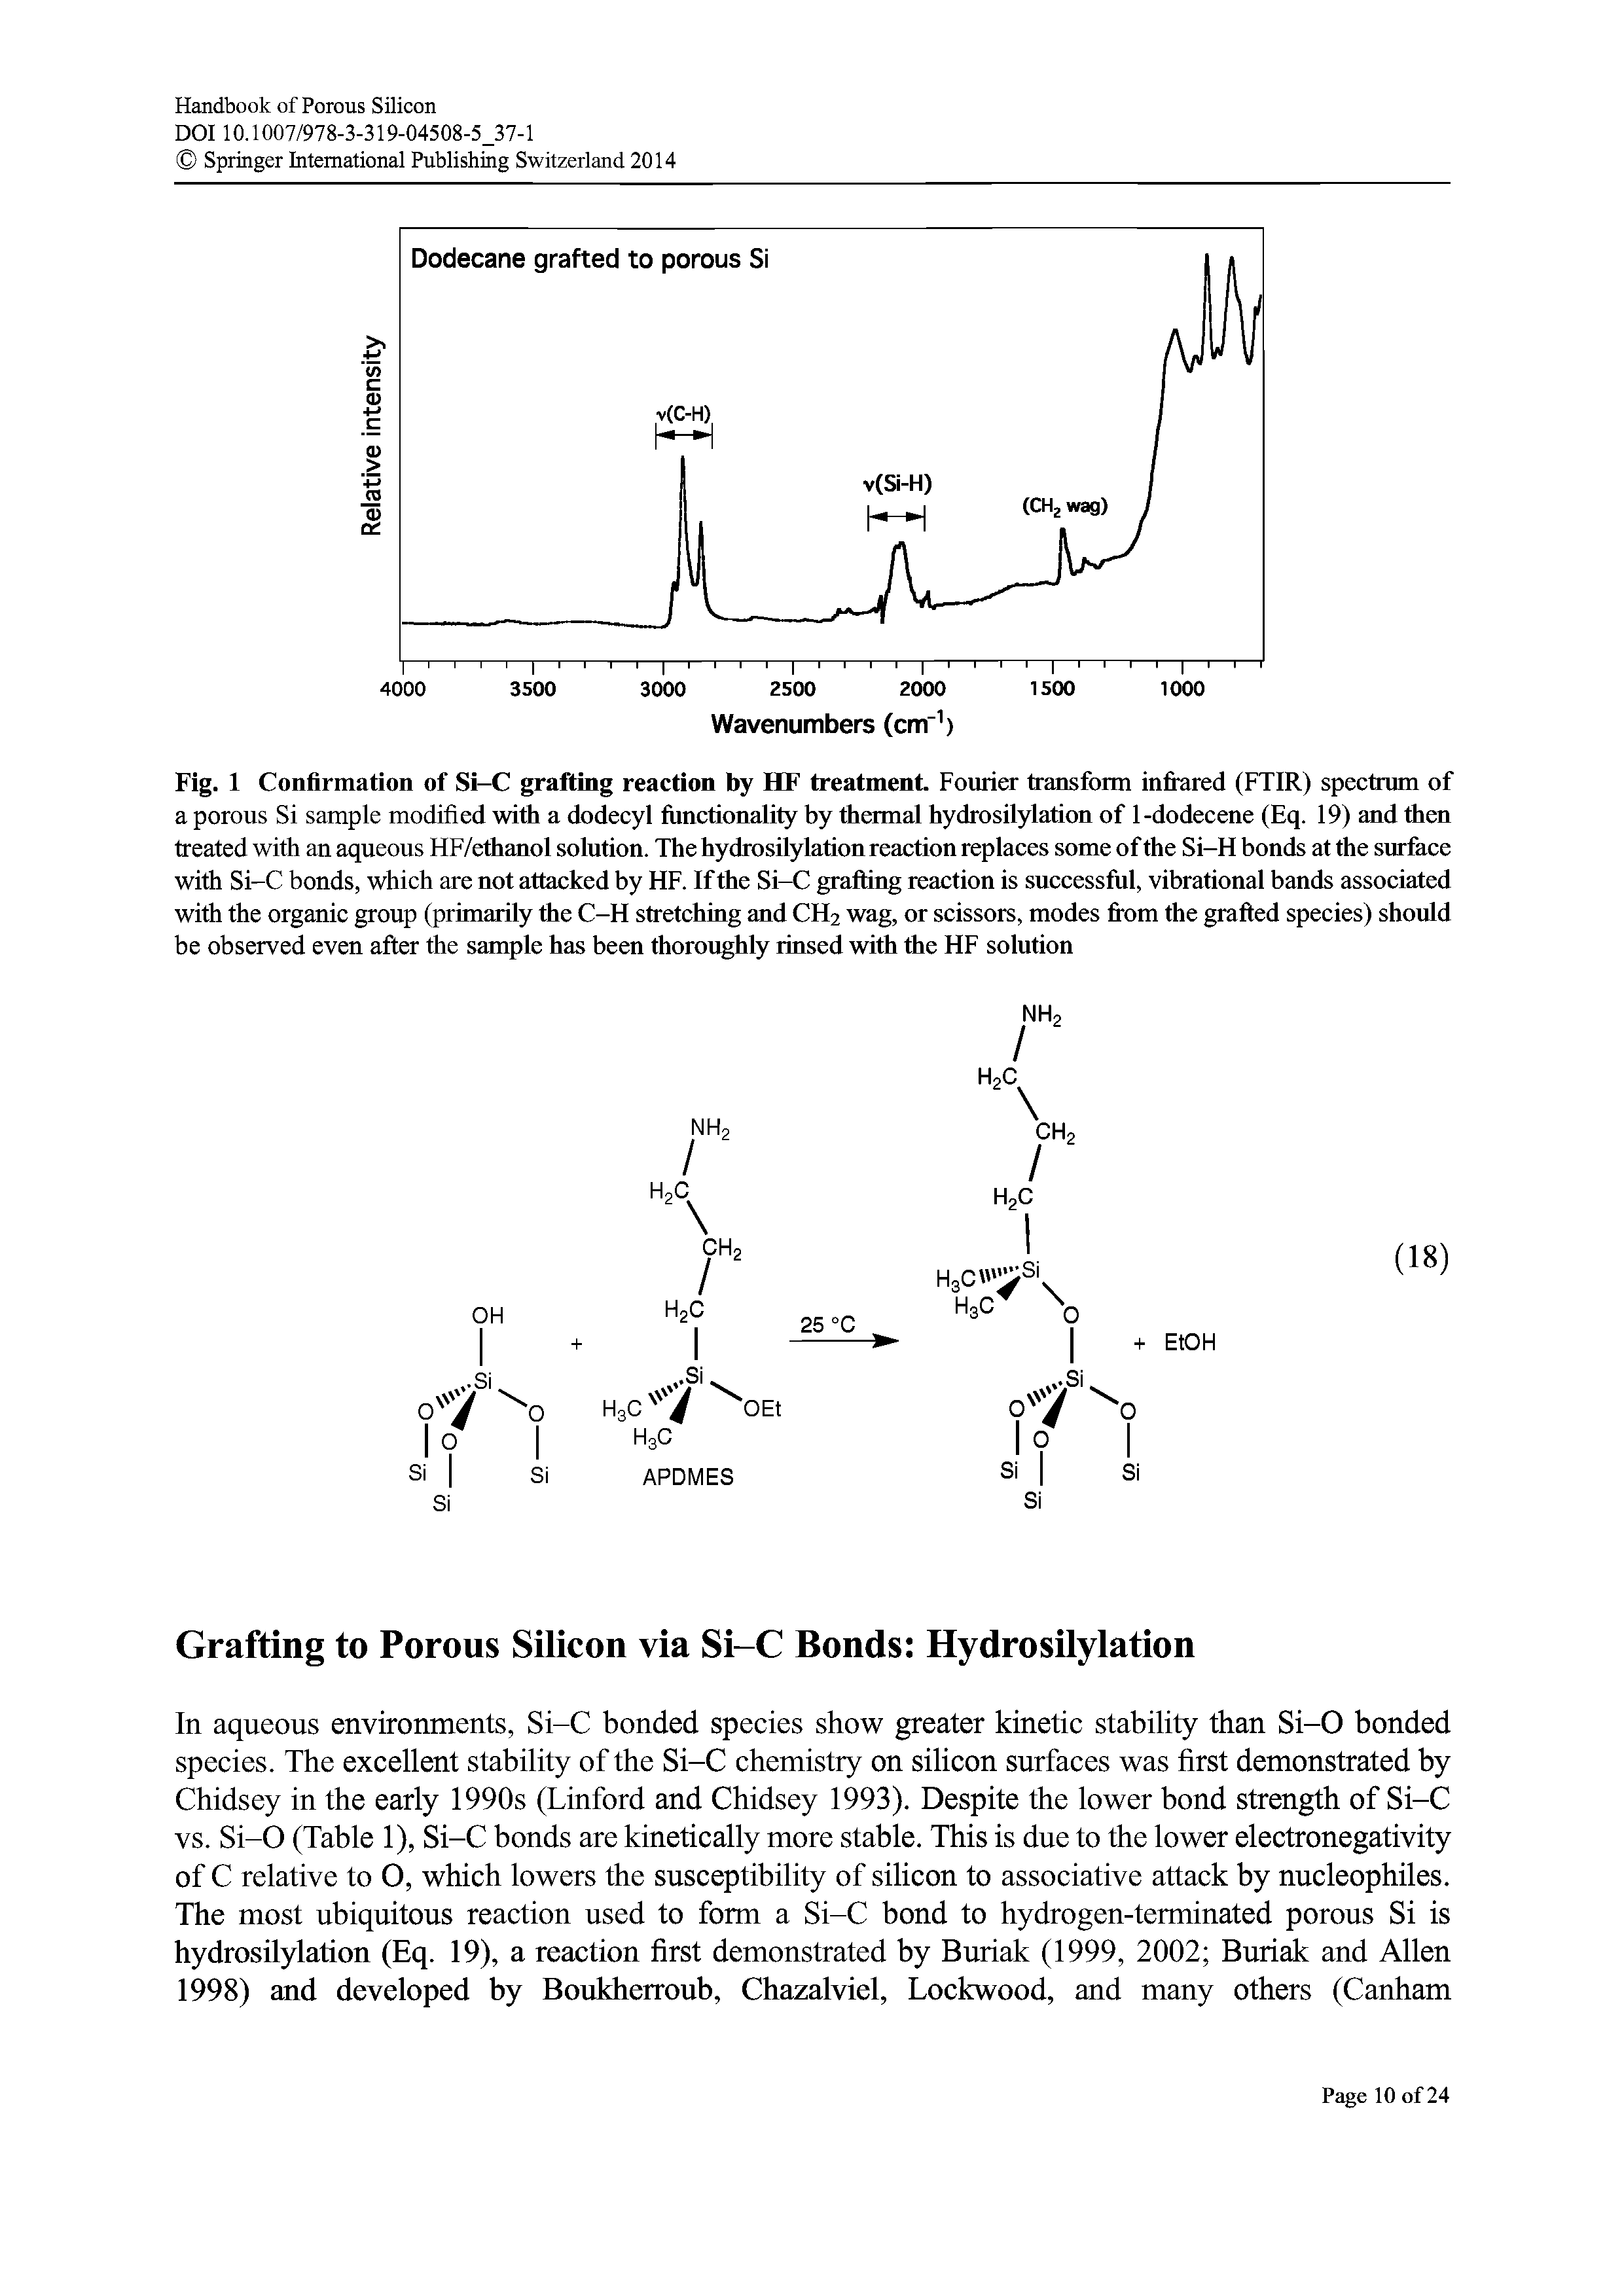 Fig. 1 Confirmation of Si-C grafting reaction by HF treatment. Fourier transform infrared (FTIR) speetmm of a porous Si sample modified with a dodeeyl functionality by thermal hydrosilylation of 1-dodecene (Eq. 19) and then treated with an aqueous HF/ethanol solution. The hydrosilylation reaction replaces some of the Si-H bonds at the surface with Si-C bonds, which are not attacked by HF. If the Si-C grafting reaction is successful, vibrational bands associated with the organic group (primarily the C-H stretching and CH2 wag, or scissors, modes from the grafted species) should be observed even after the sample has been thoroughly rinsed with the HF solution...